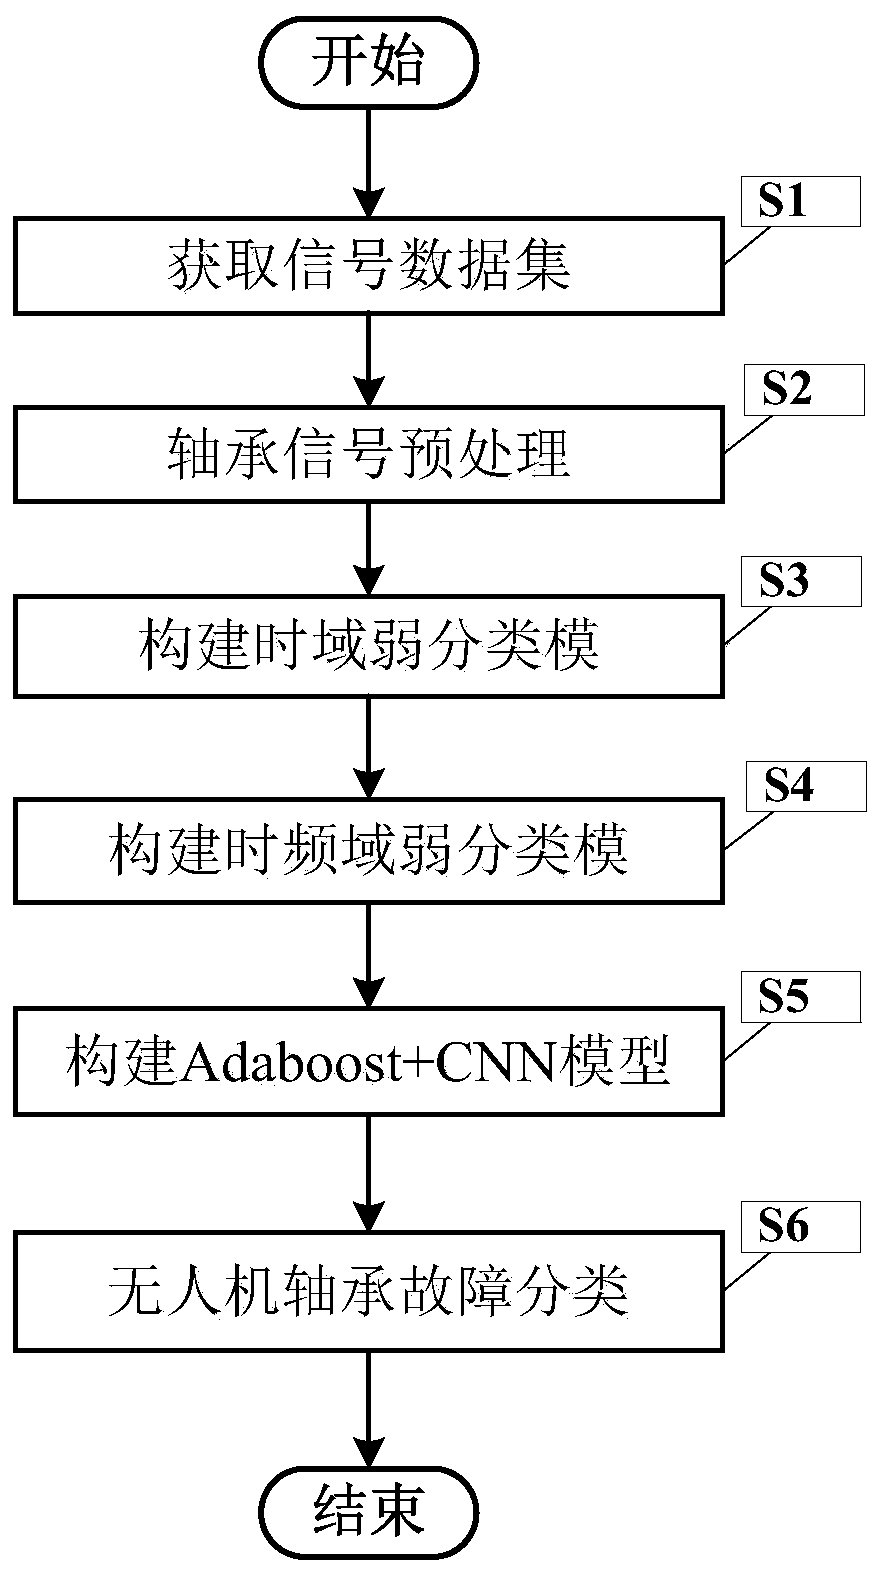 Bearing fault classification method based on CNN and Adaboost